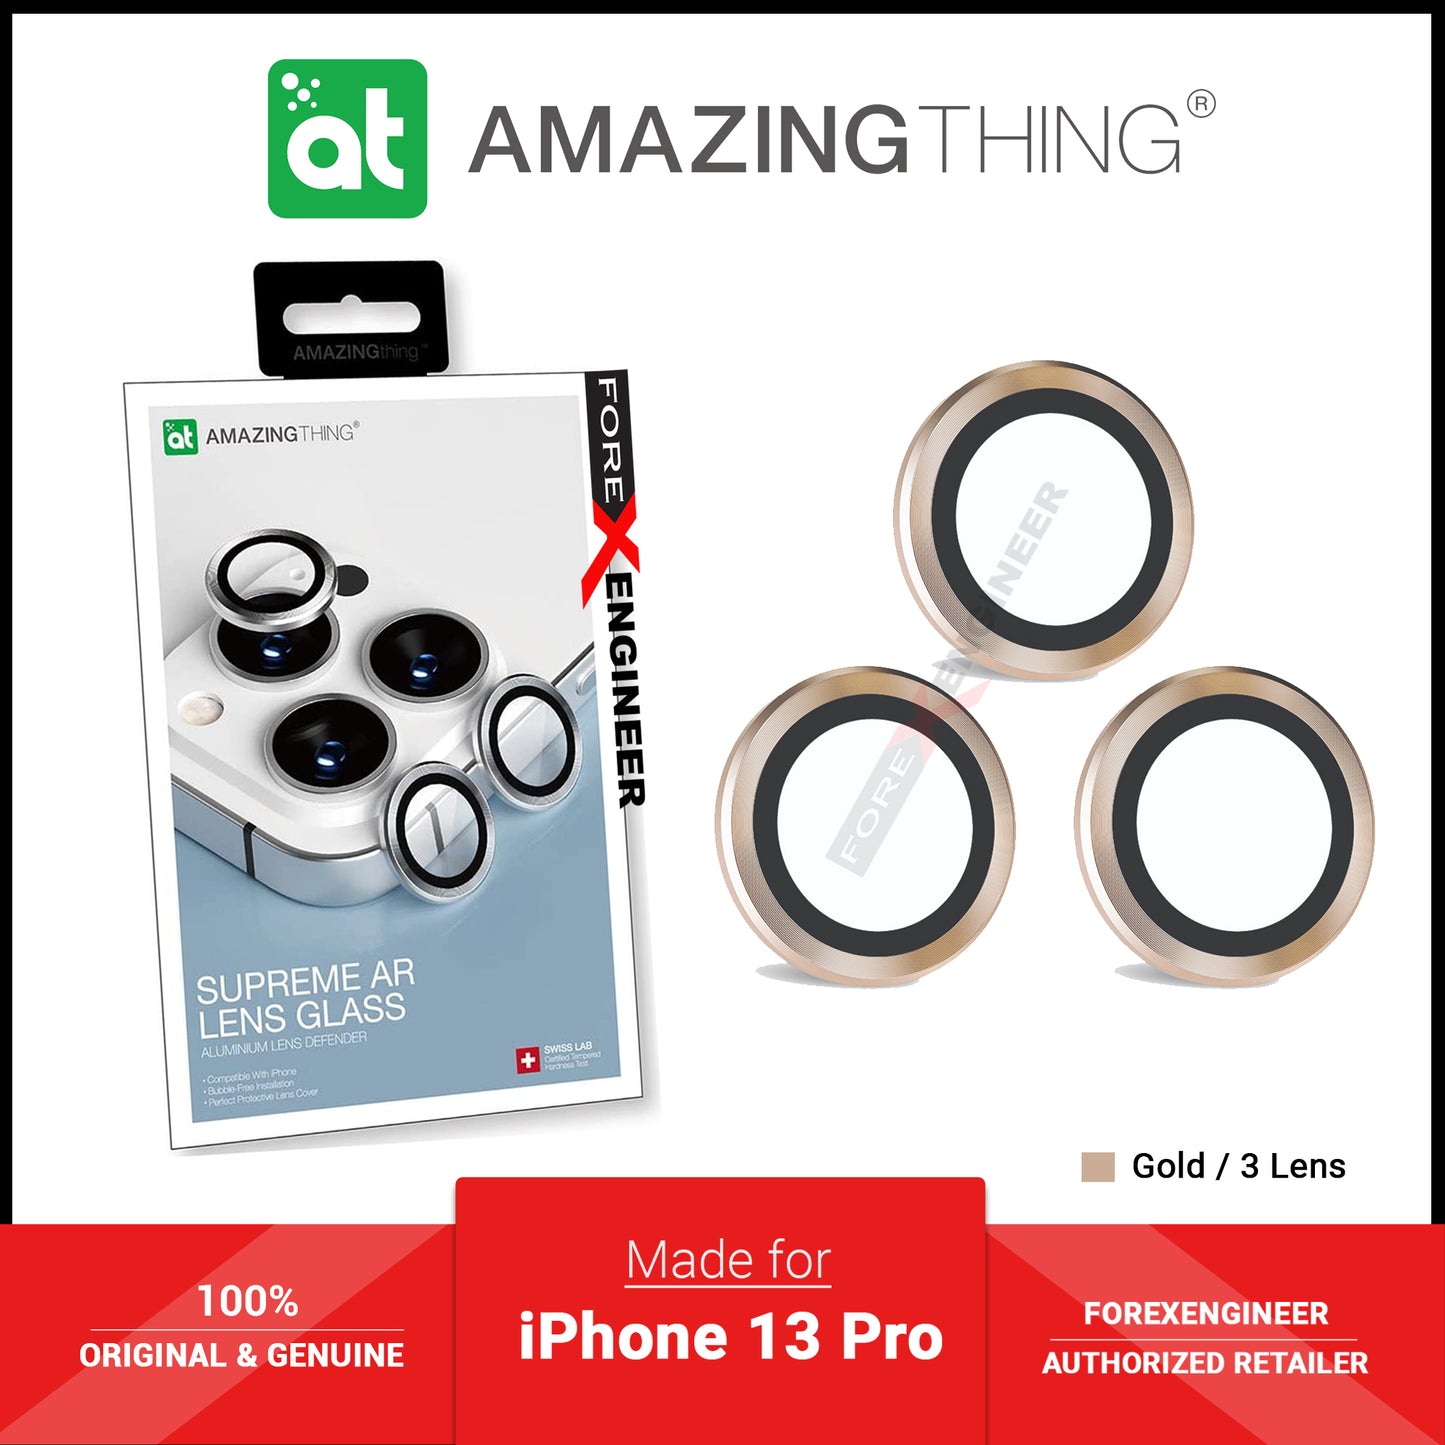 AMAZINGthing SUPREME AR 3D LensGlass Protector for iPhone 13 Pro 6.1" 5G ( Three Lens ) - Gold (Barcode: 4892878069519 )